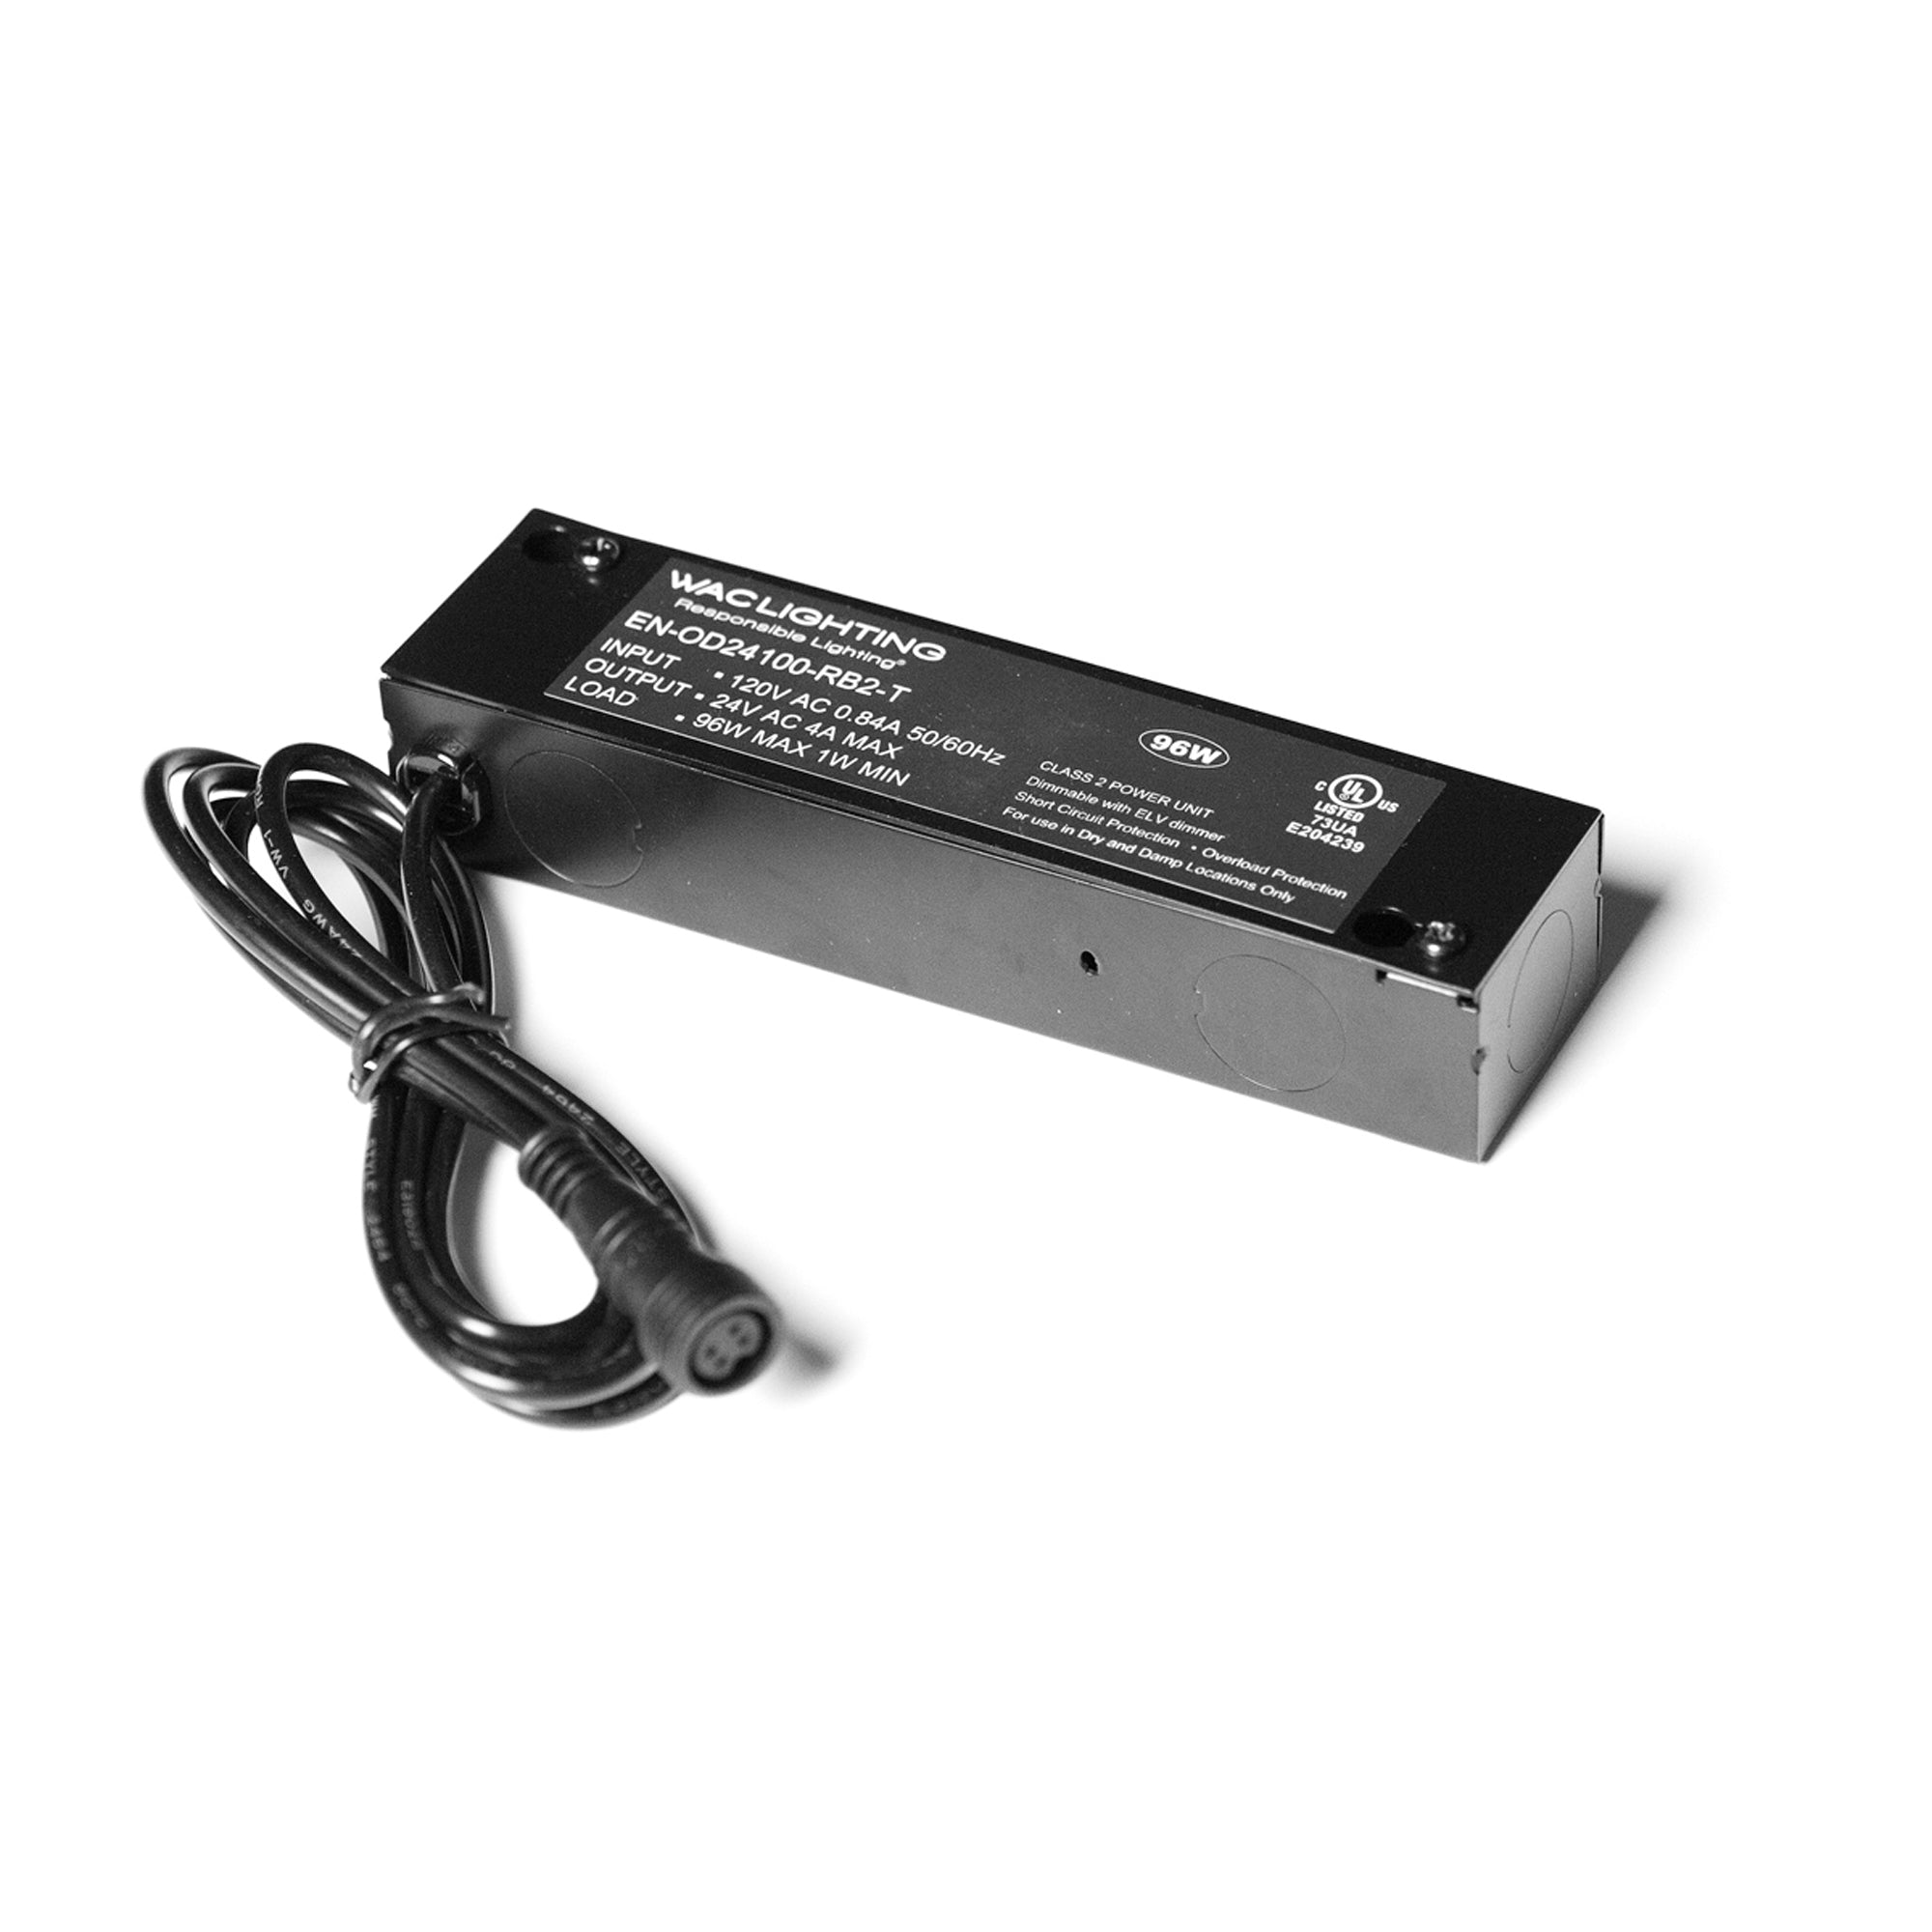 Dry Location Remote Hardwired Transformer for Outdoor 24V RGB and PRO Strip Lights 120V Input 100W Max